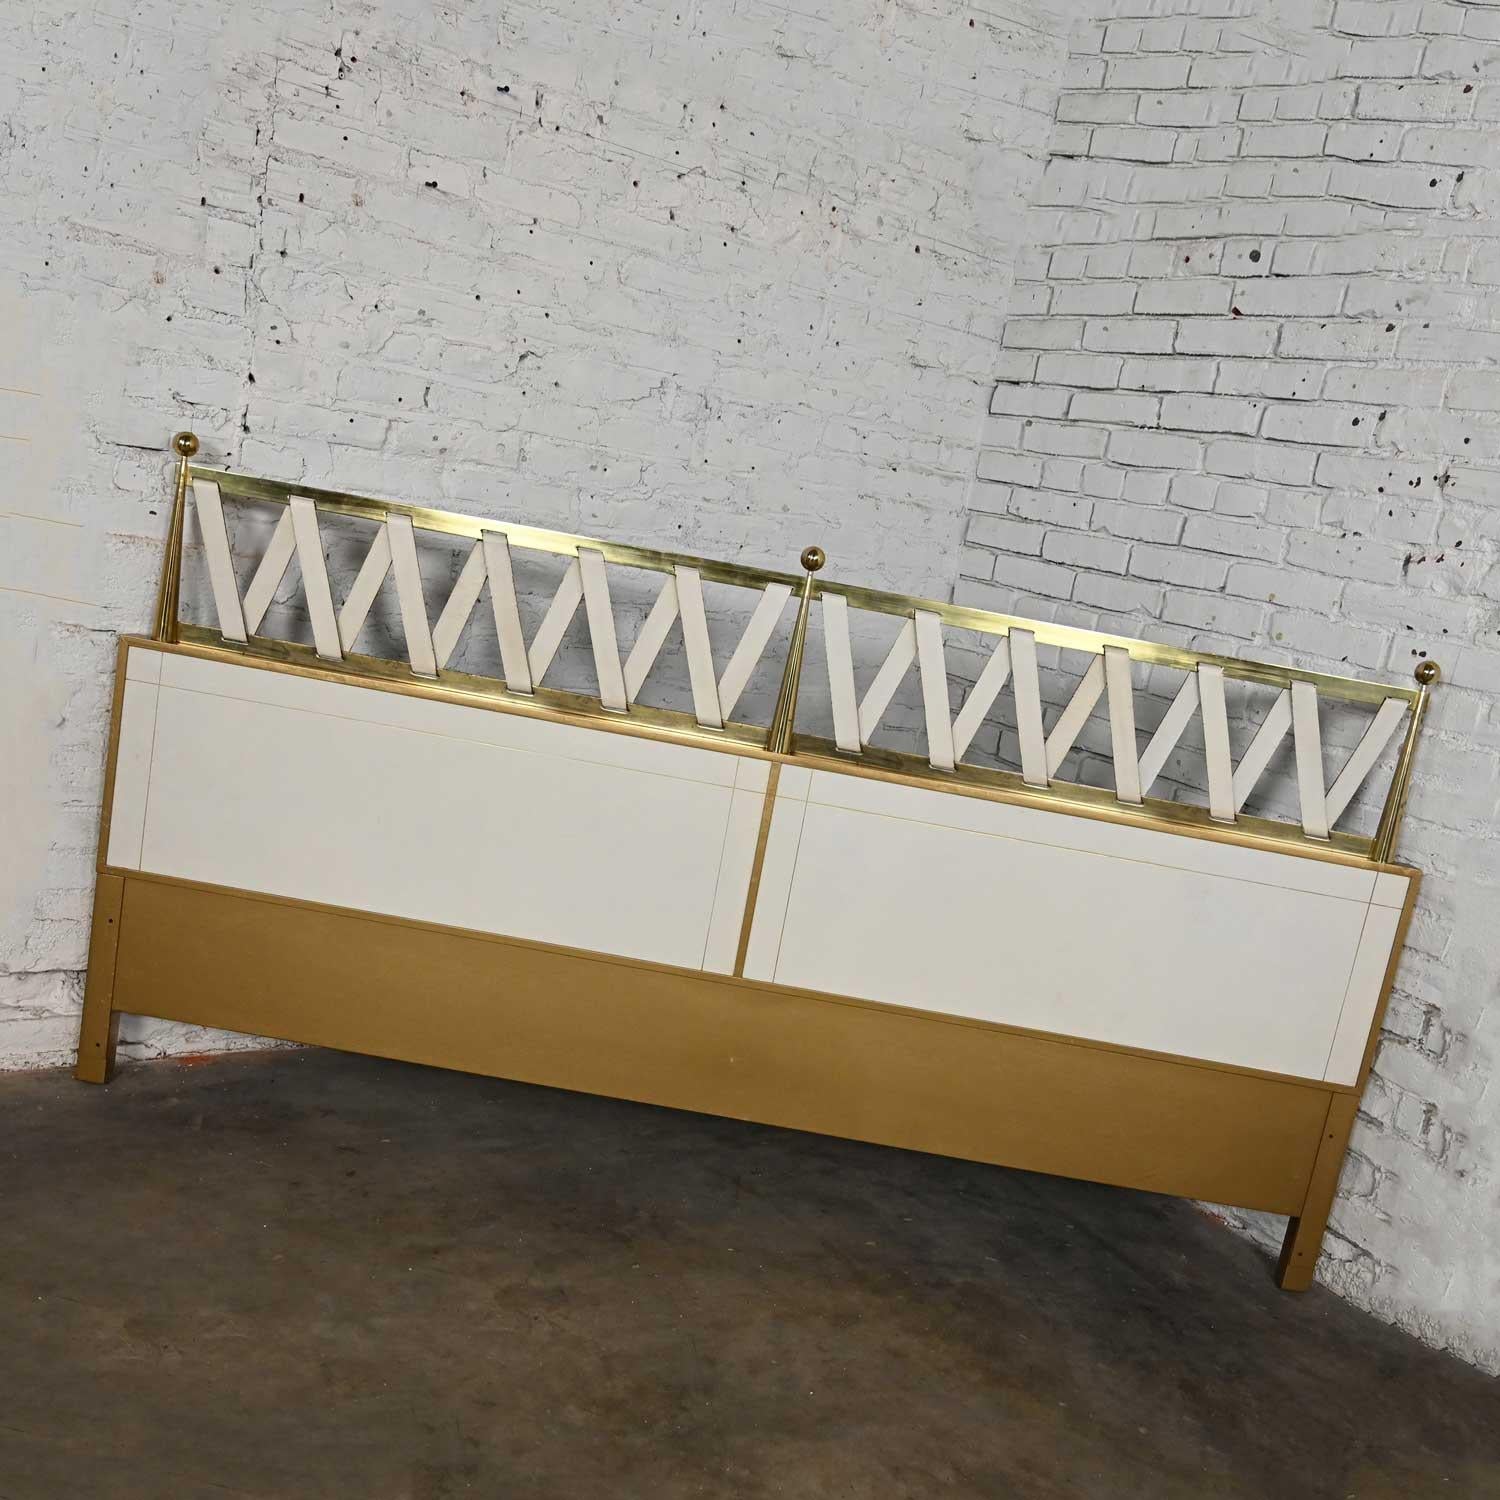 Stunning vintage Hollywood Regency Art Deco king sized headboard by Renzo Rutili for Johnson Furniture. Comprised of white leather front panels with gilded trim and gold painted below, brass tapered conical post accents and a white leather strap